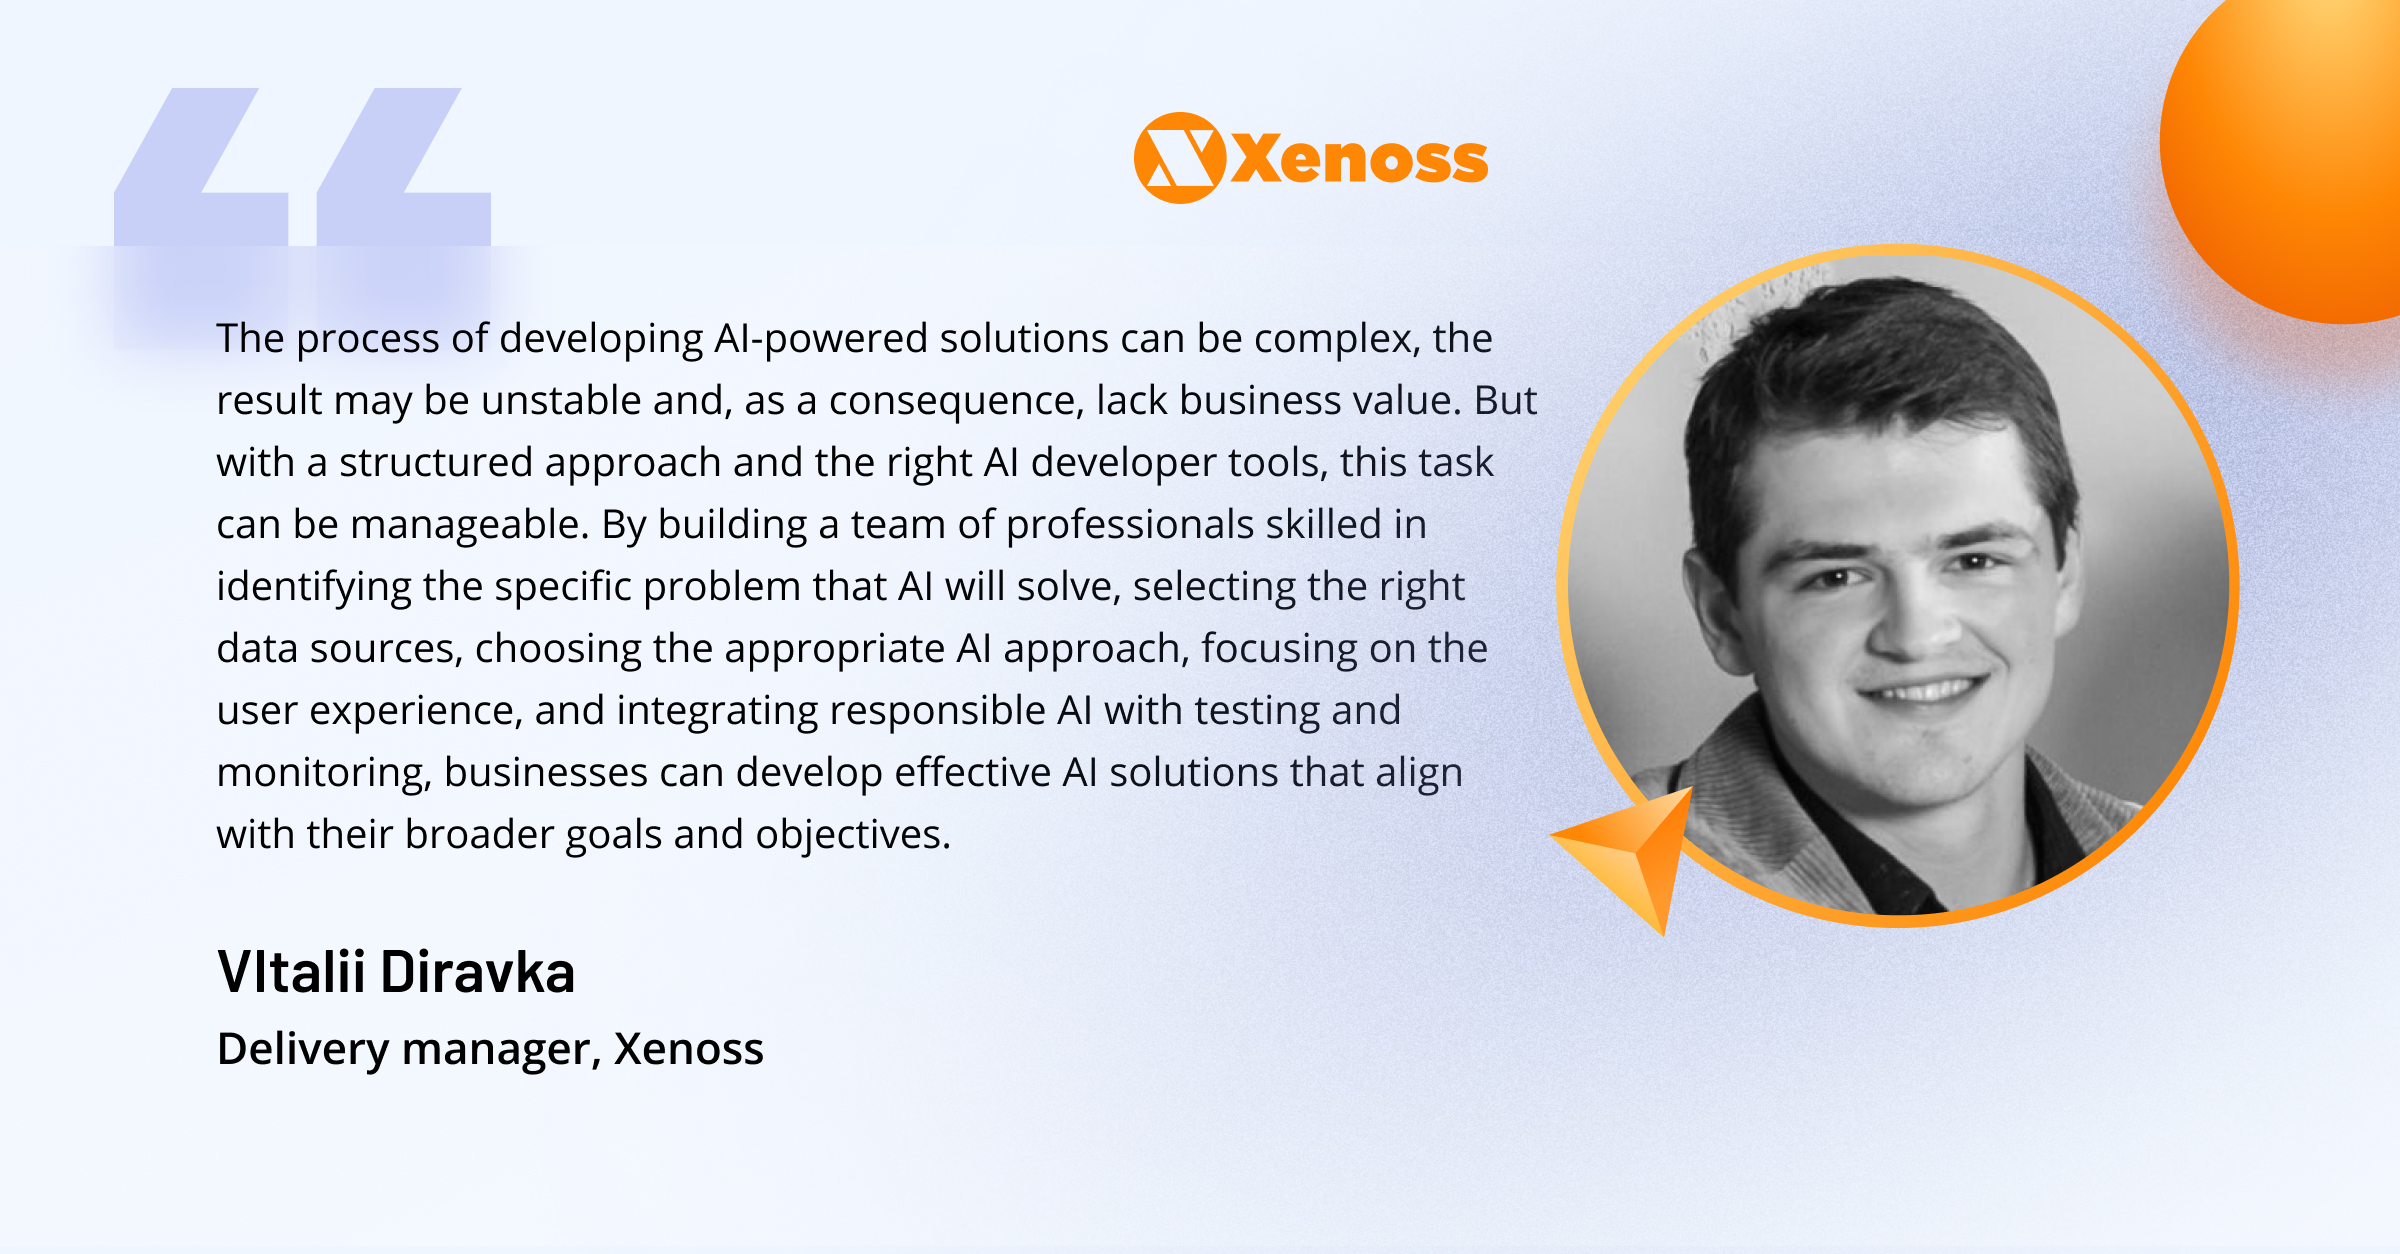 Quote covering tips on AI product development from a delivery manager at Xenoss